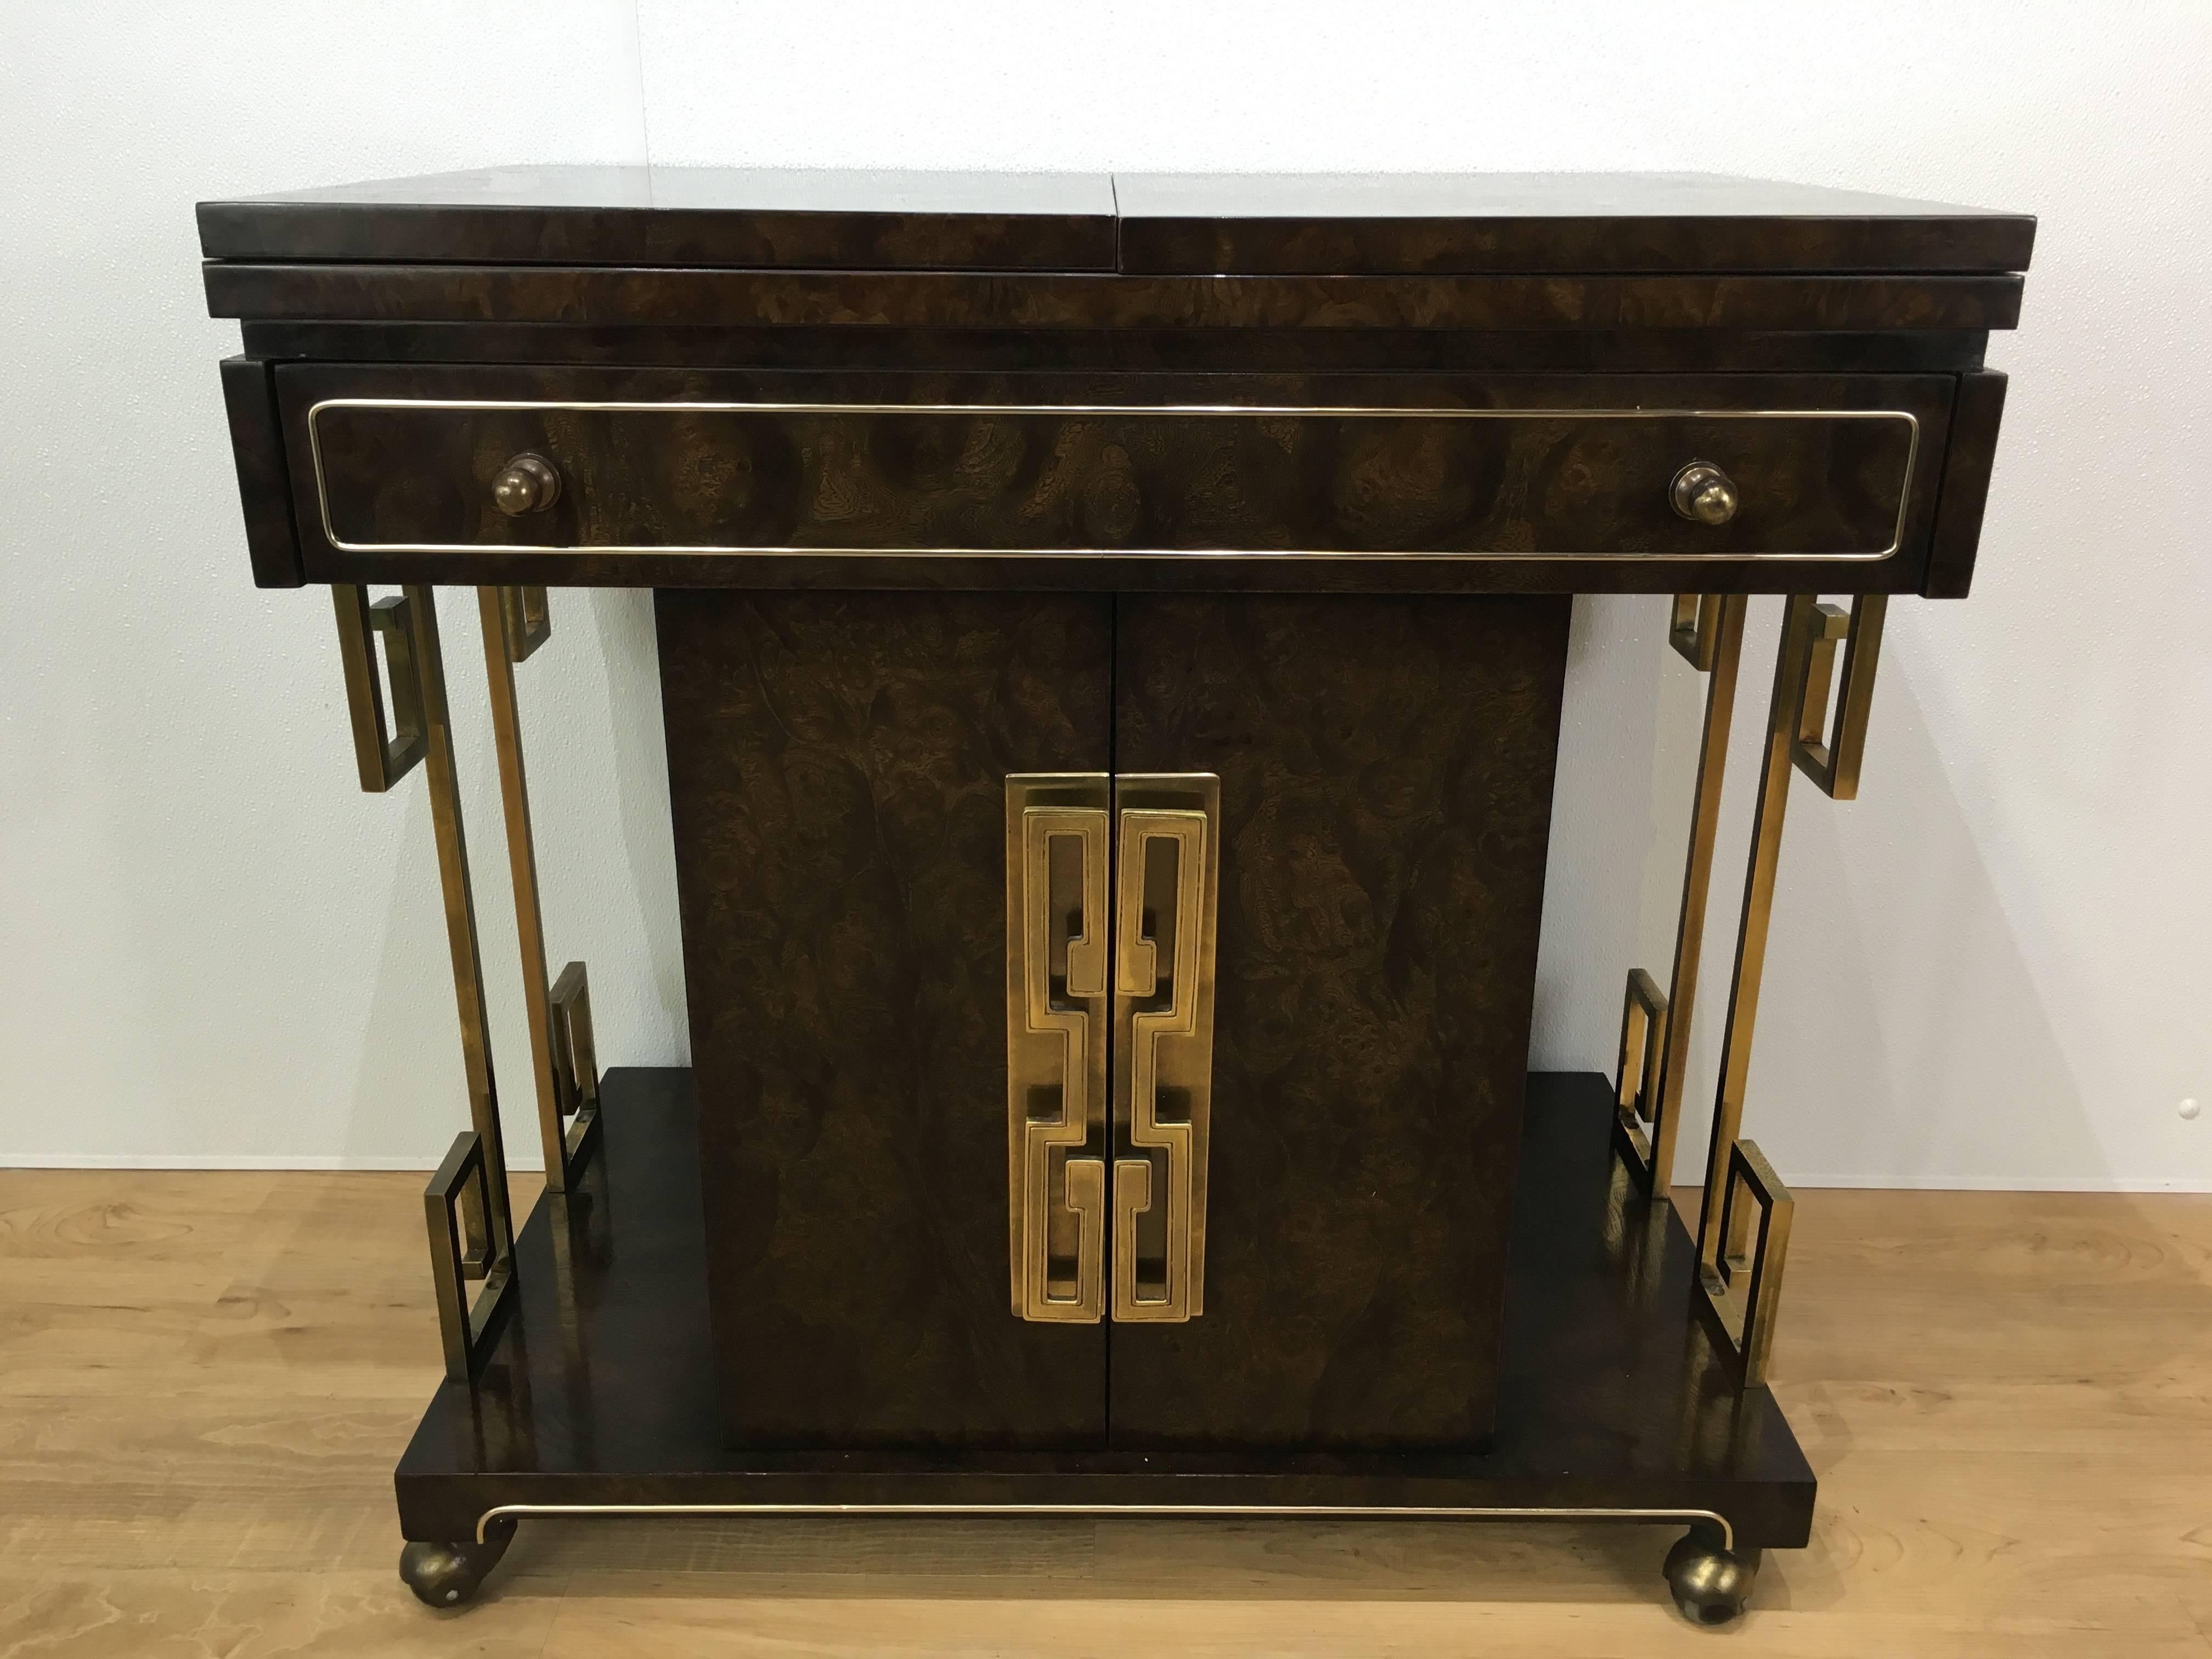 Mastercraft Greek key dry bar, of expandable rectangular form, beautiful variegated burl wood with stylized brass Greek key mounts. Fitted with one long drawer and two lower doors, raised on brass castors. Length of bar with extended top measures